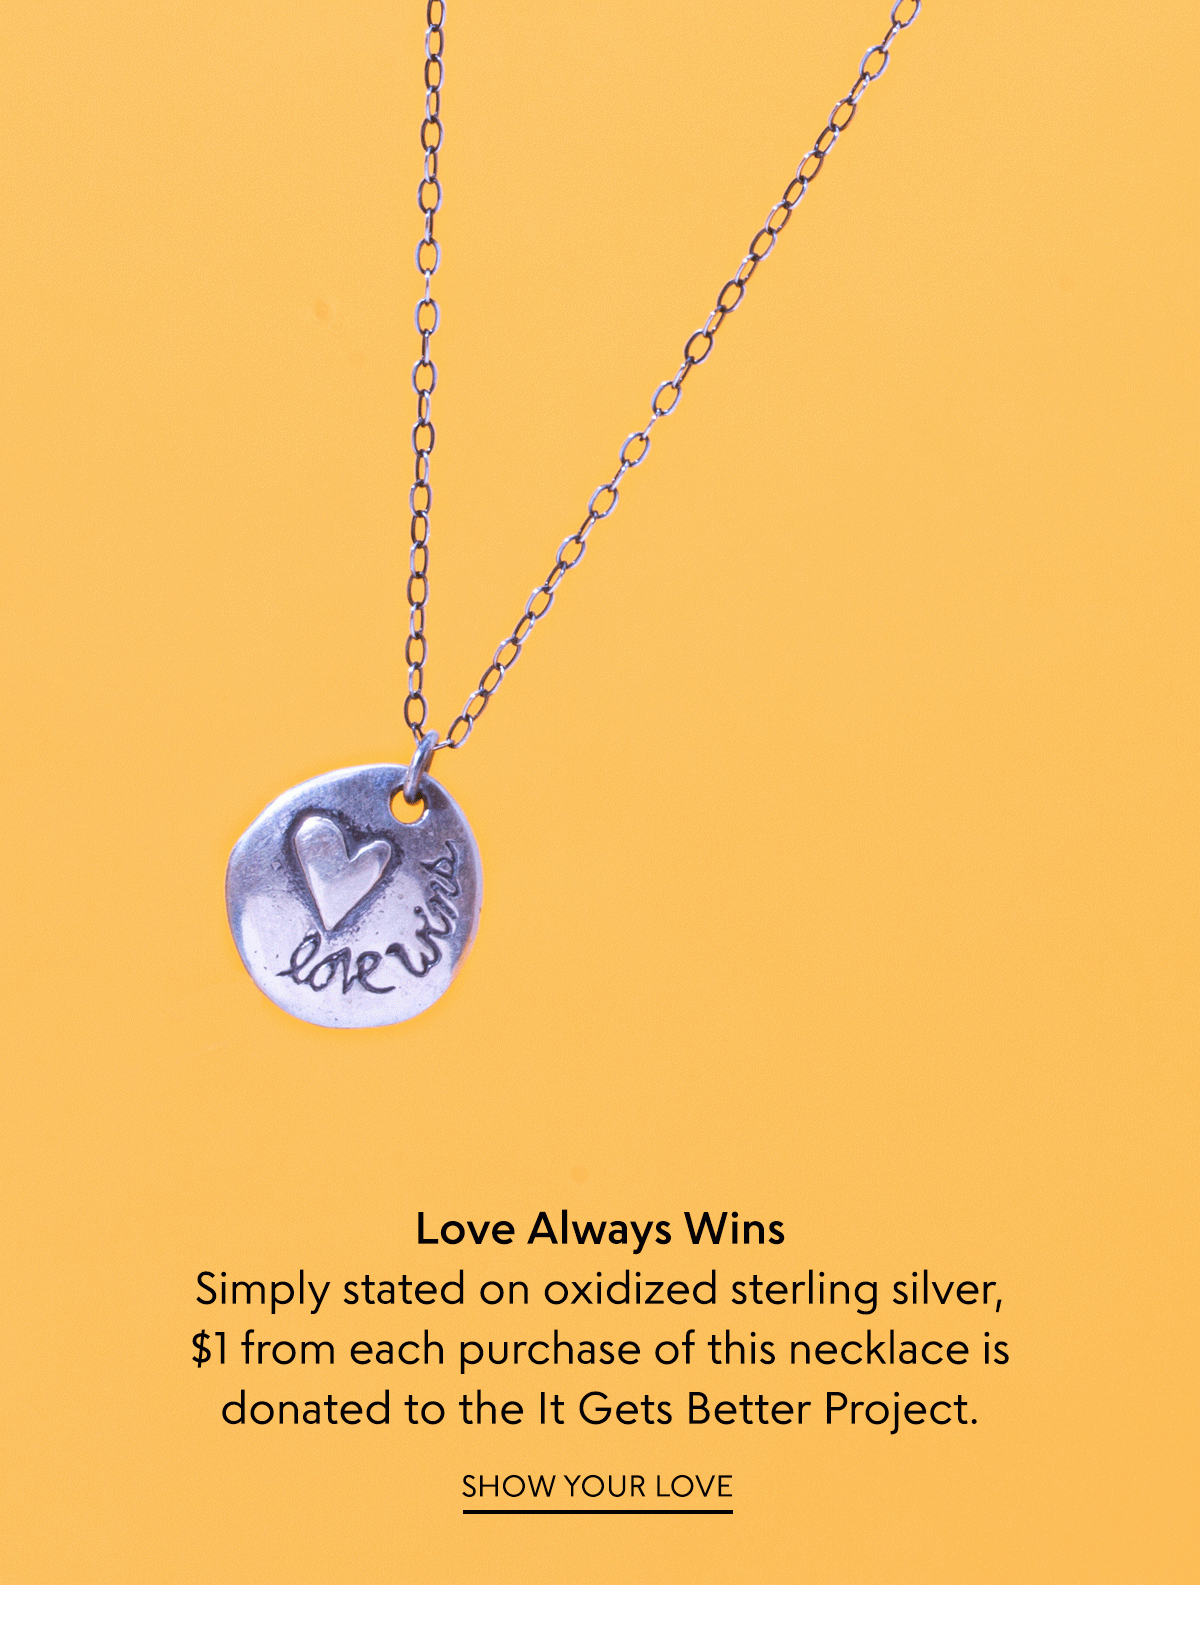 The Love Wins Necklace: simply stated on oxidized sterling silver, $1 from each purchase of this necklace is donated to the It Gets Better Project.